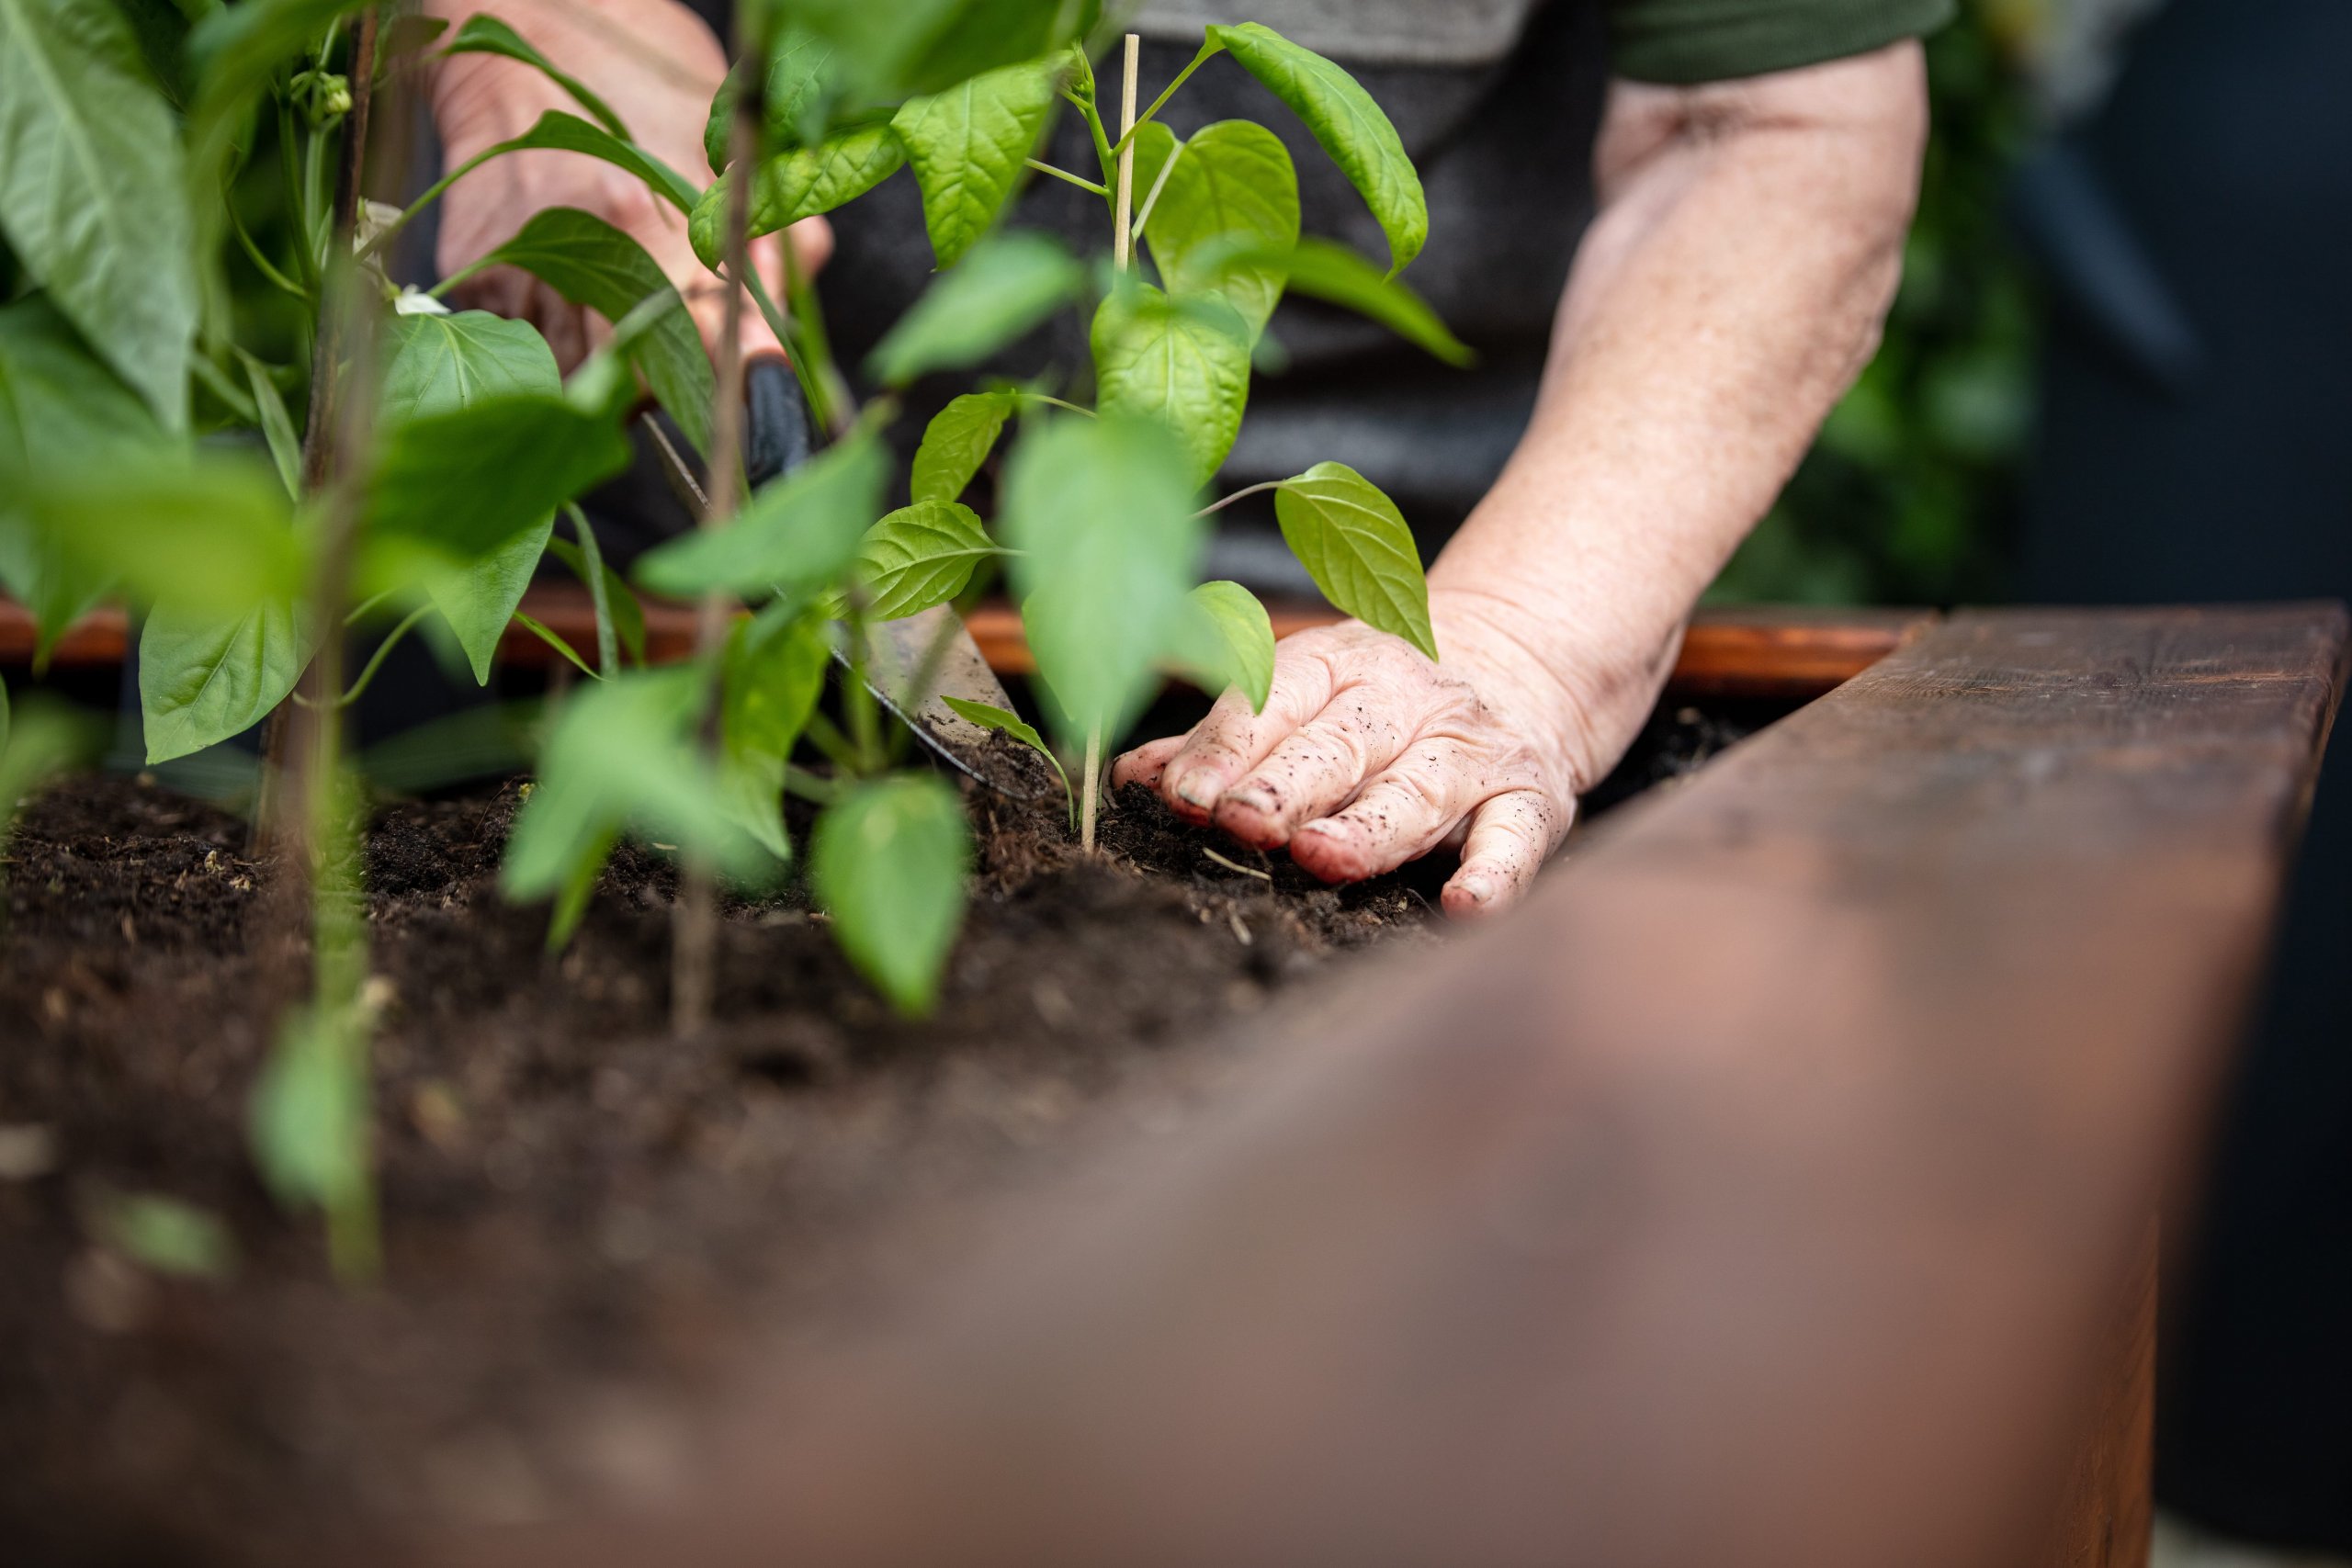 exposure to soil microbes during gardening can improve gut health